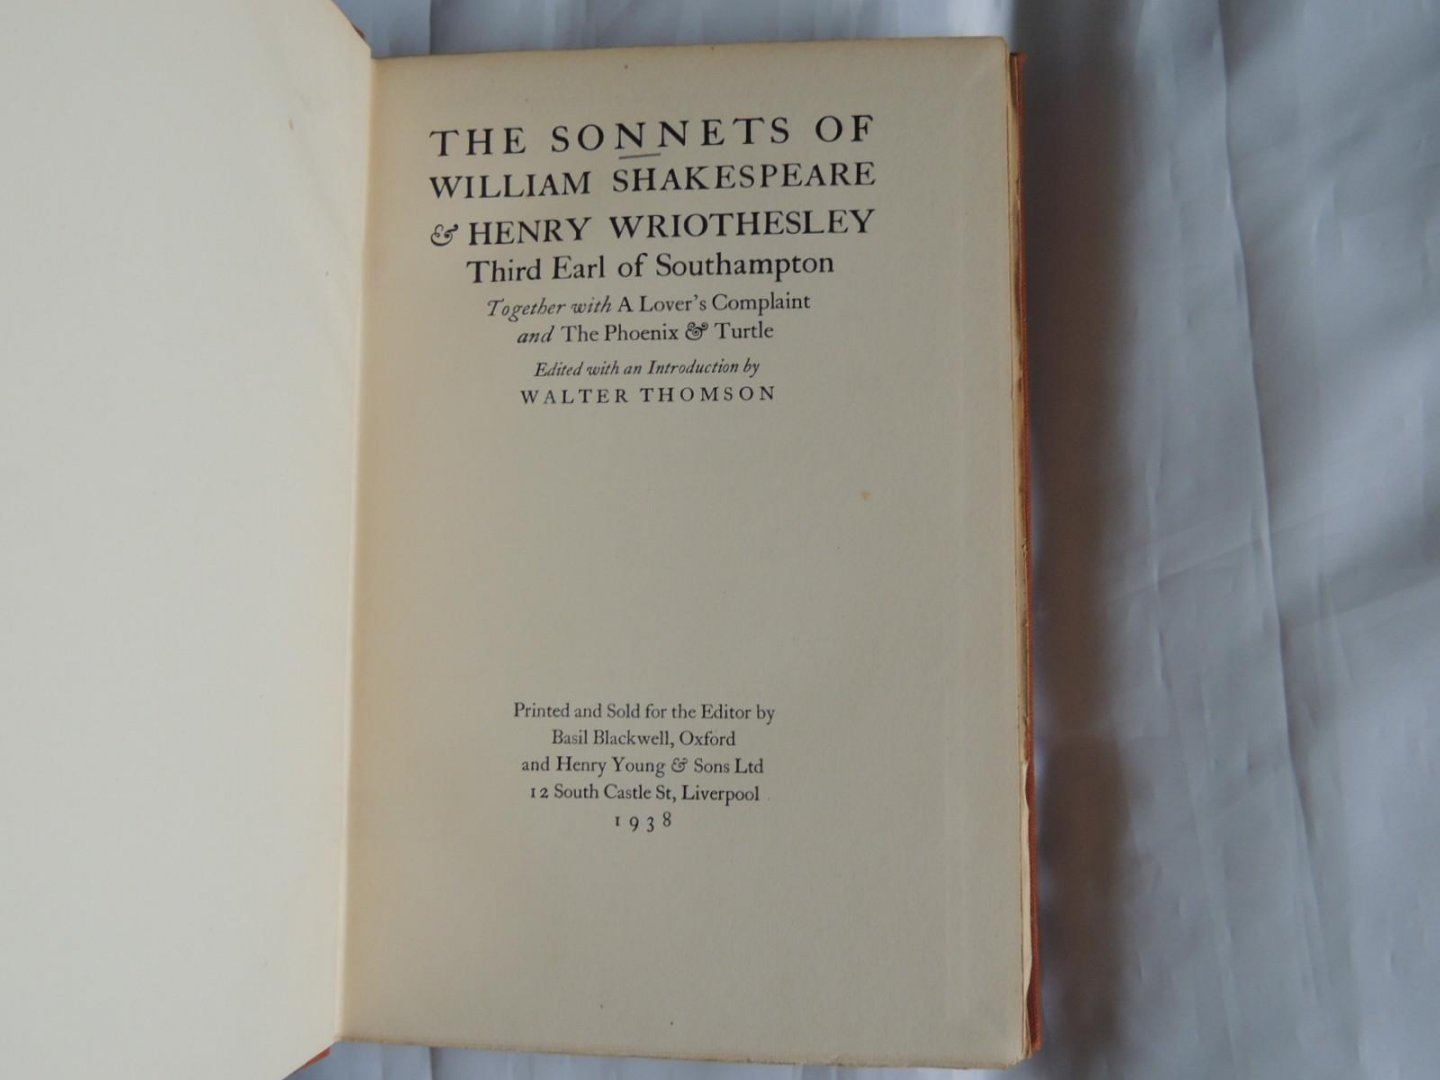 William Shakespeare; Walter Thomson - The sonnets of William Shakespeare & Henry Wriothesley, third Earl of Southampton : together with A lover's complaint and the phoenix & turtle